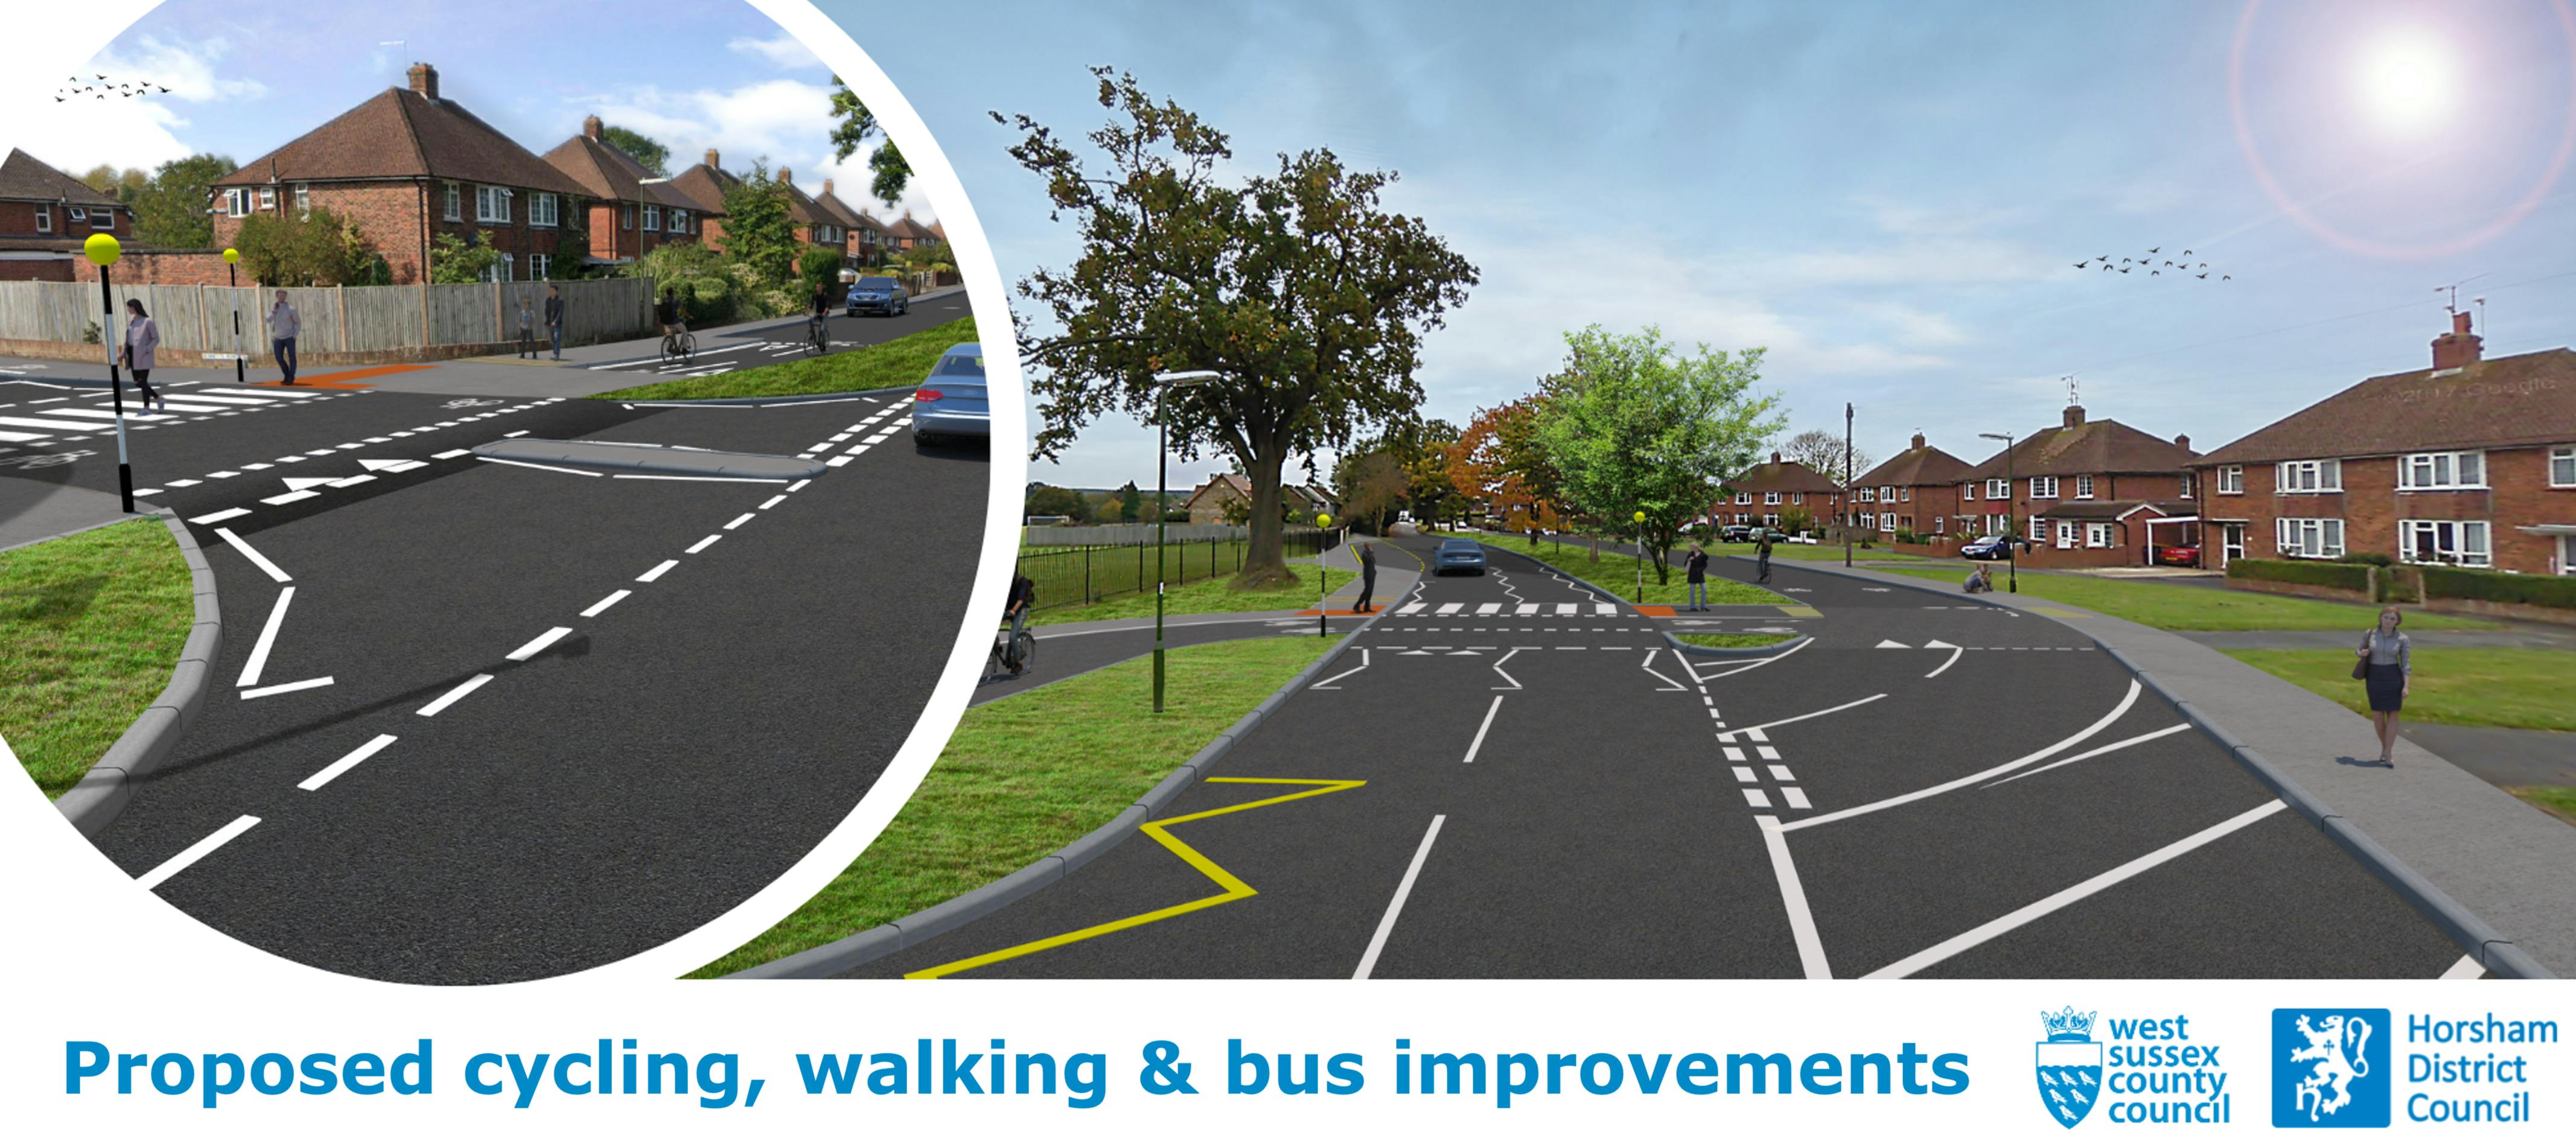 Artists impression of cycling, walking and bus improvements along Comptons Lane and at junction with Bennetts Road.